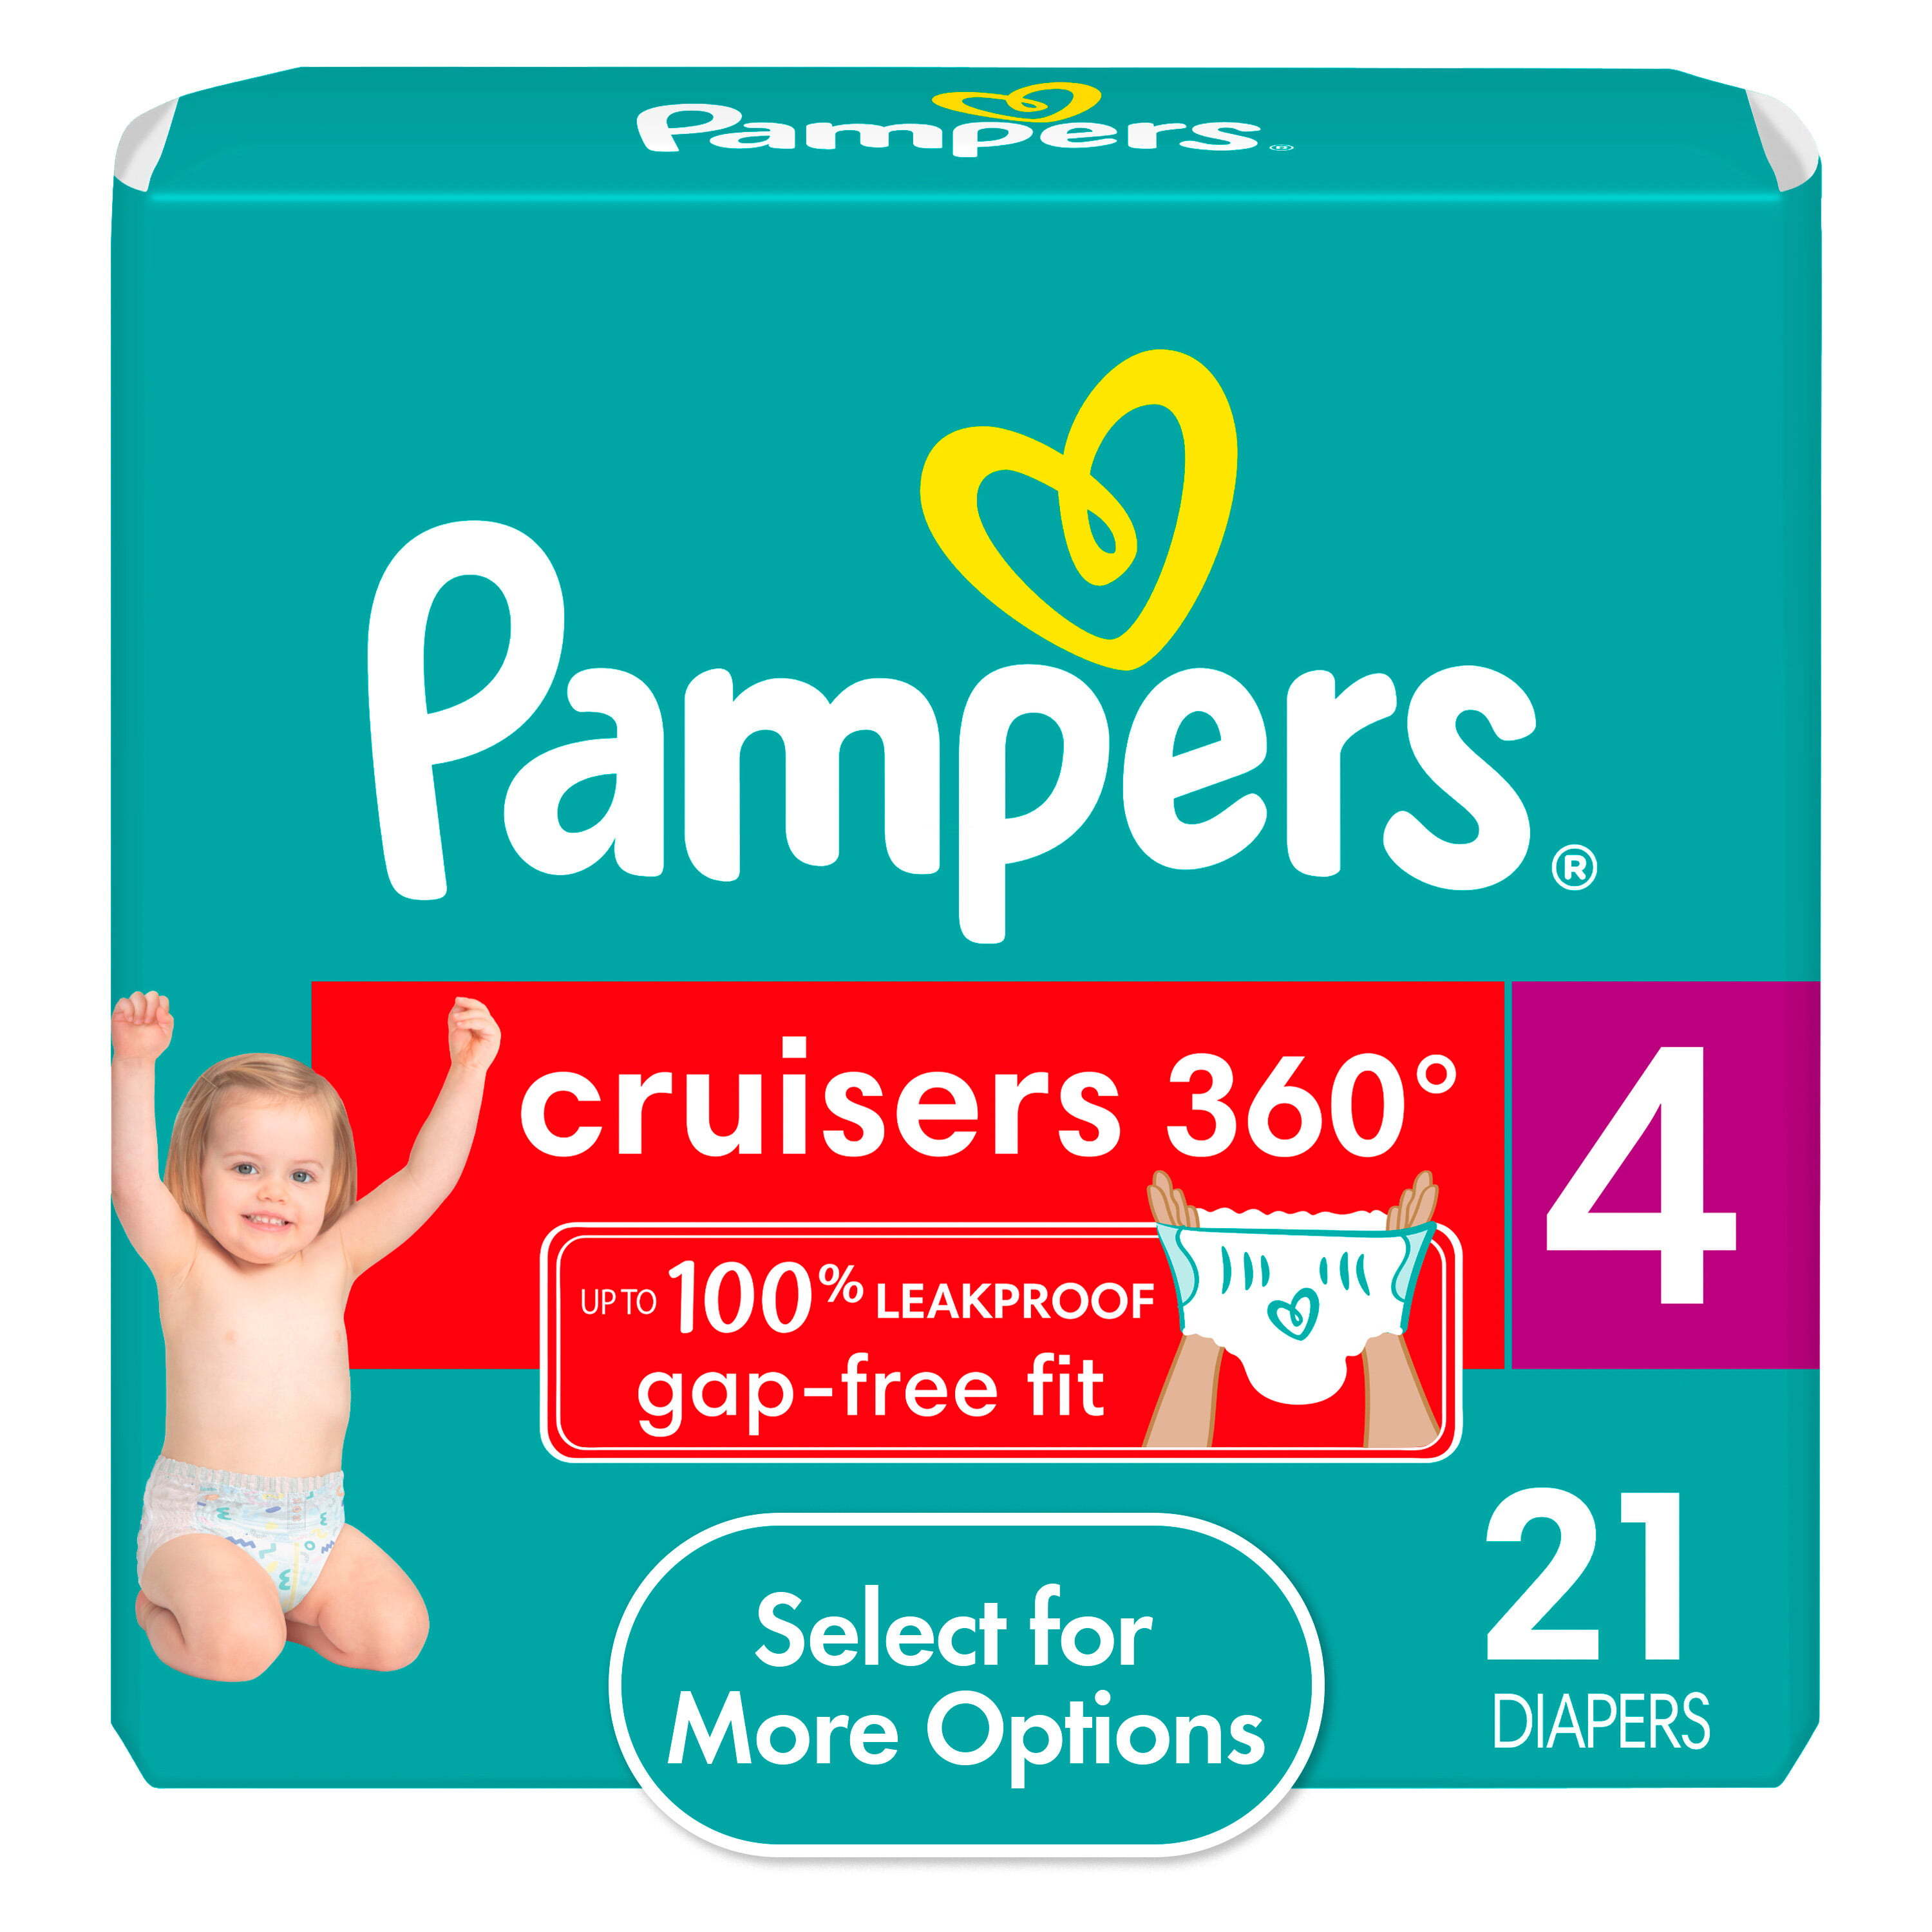 Pampers Cruisers 360 Diapers Size 4, 21 Count (Select for More Options) - image 1 of 15